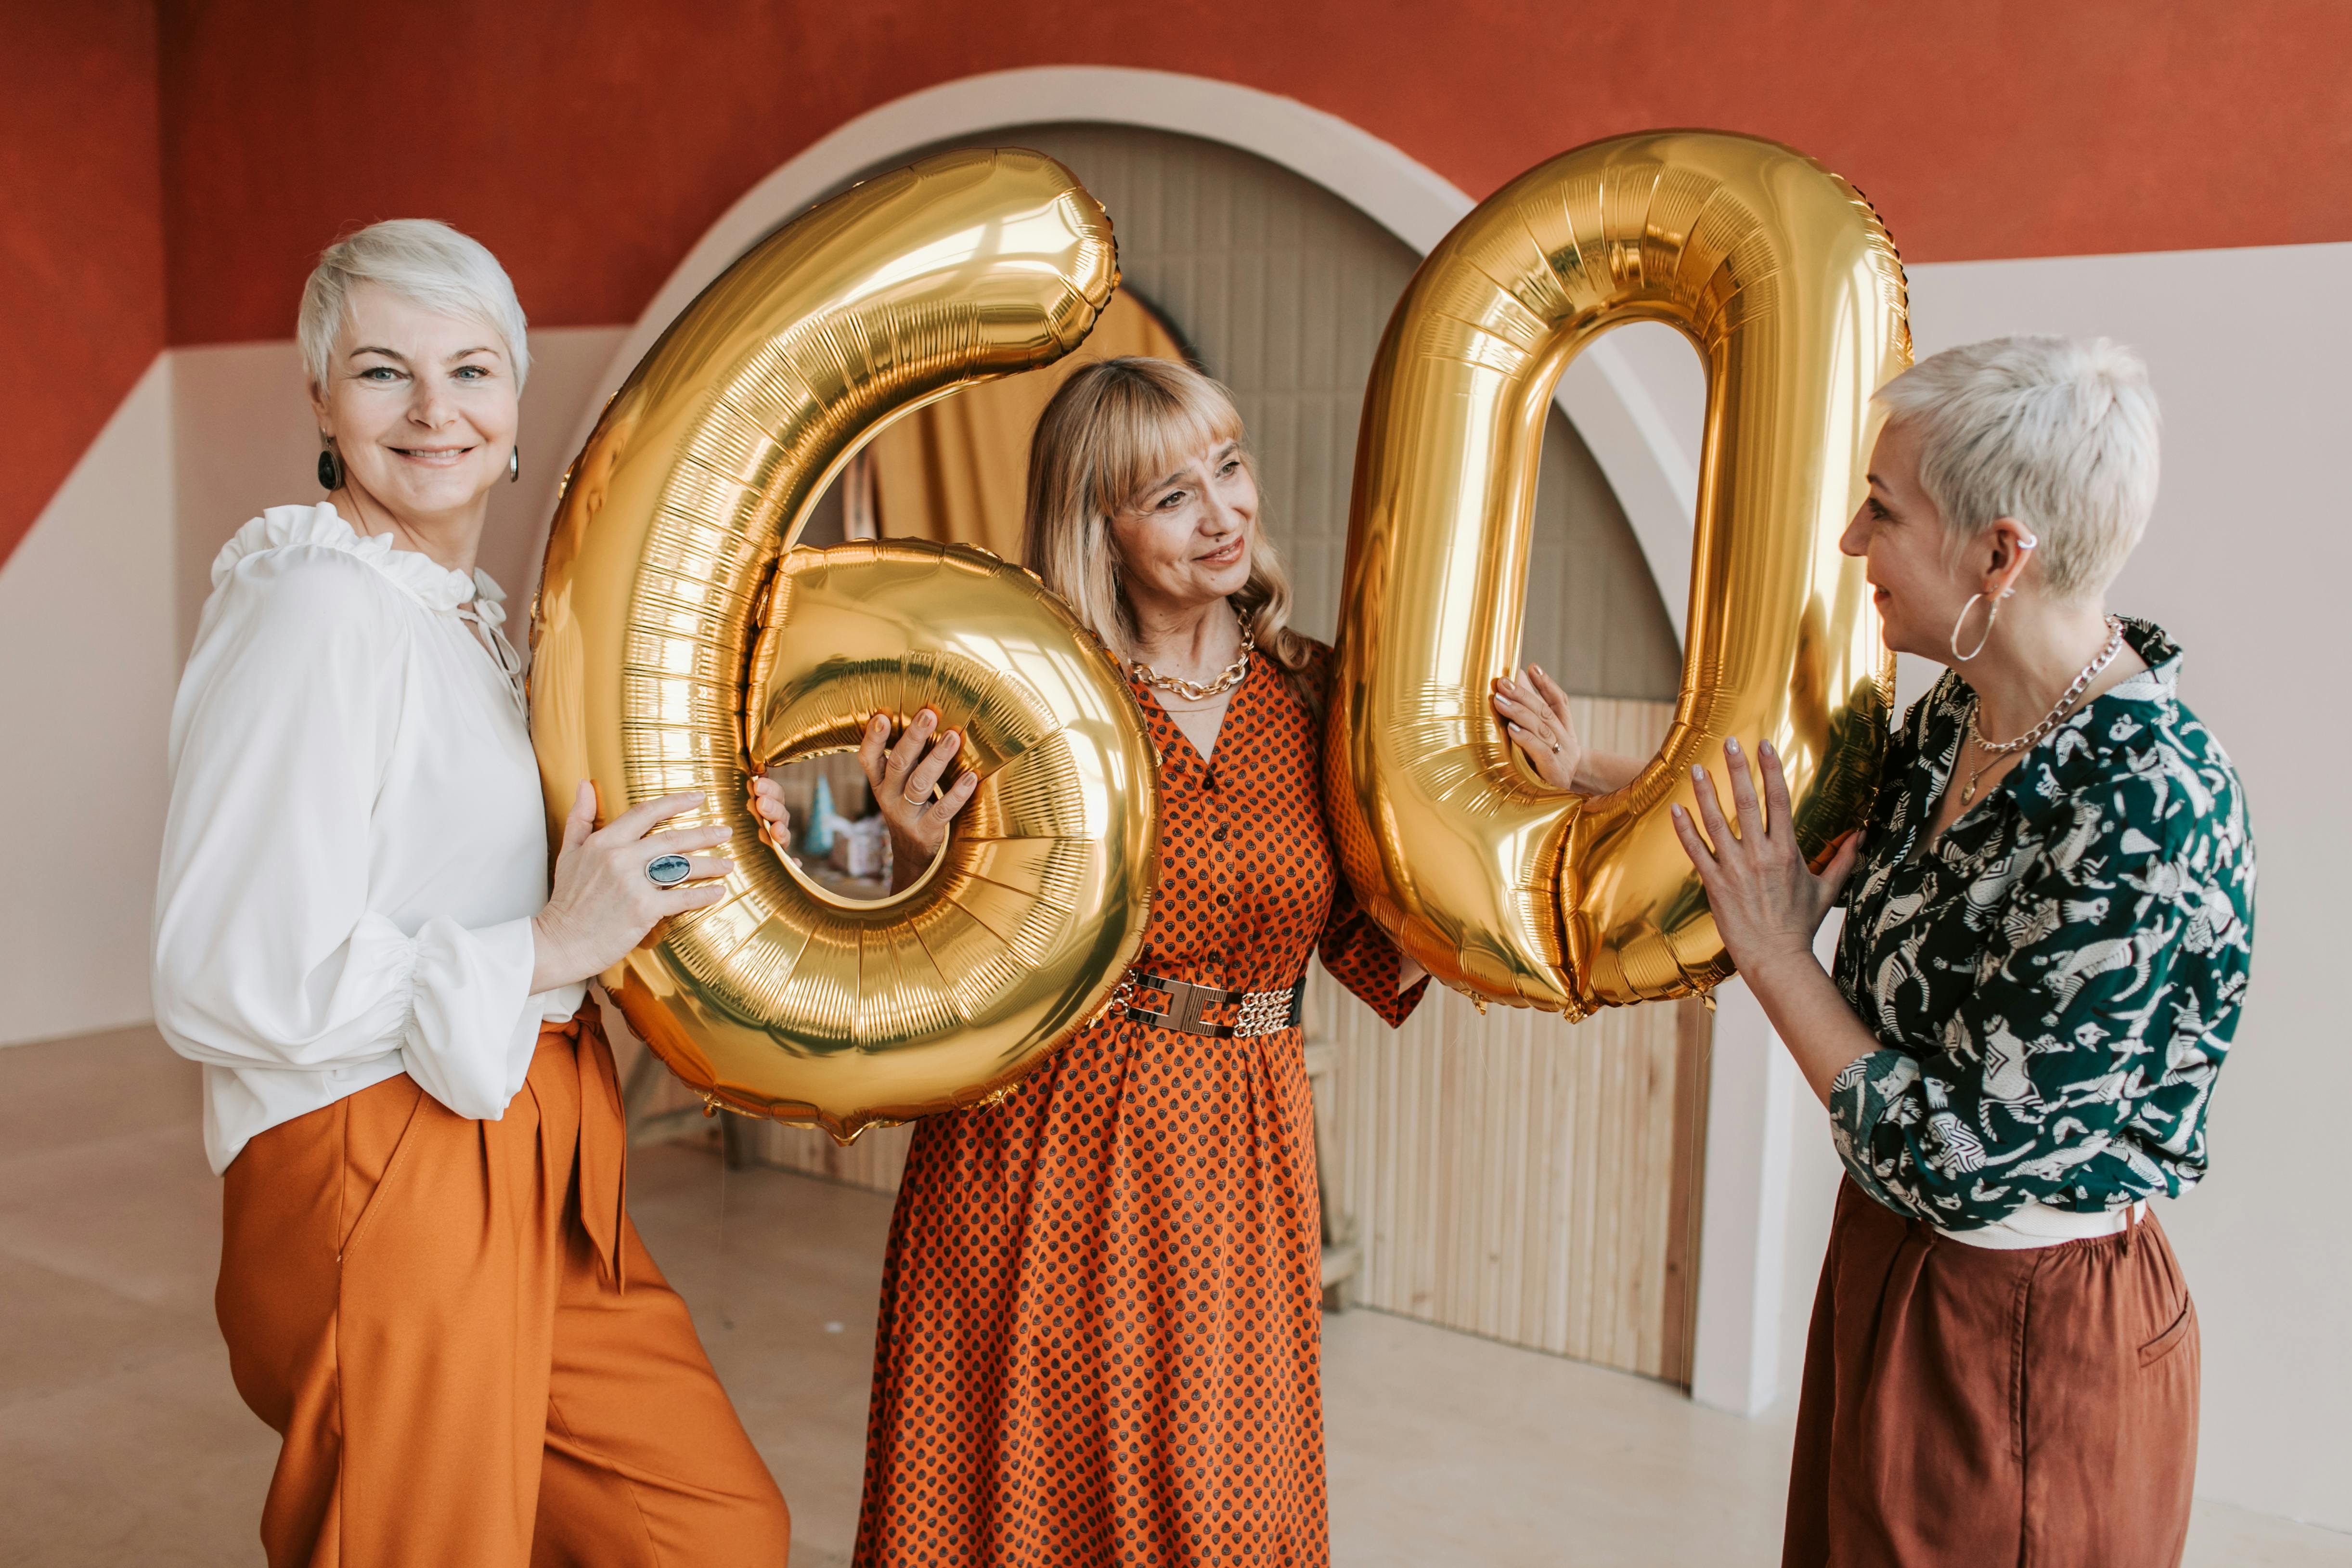 Three women holding up birthday balloons that write out the number "60" | Source: Pexels